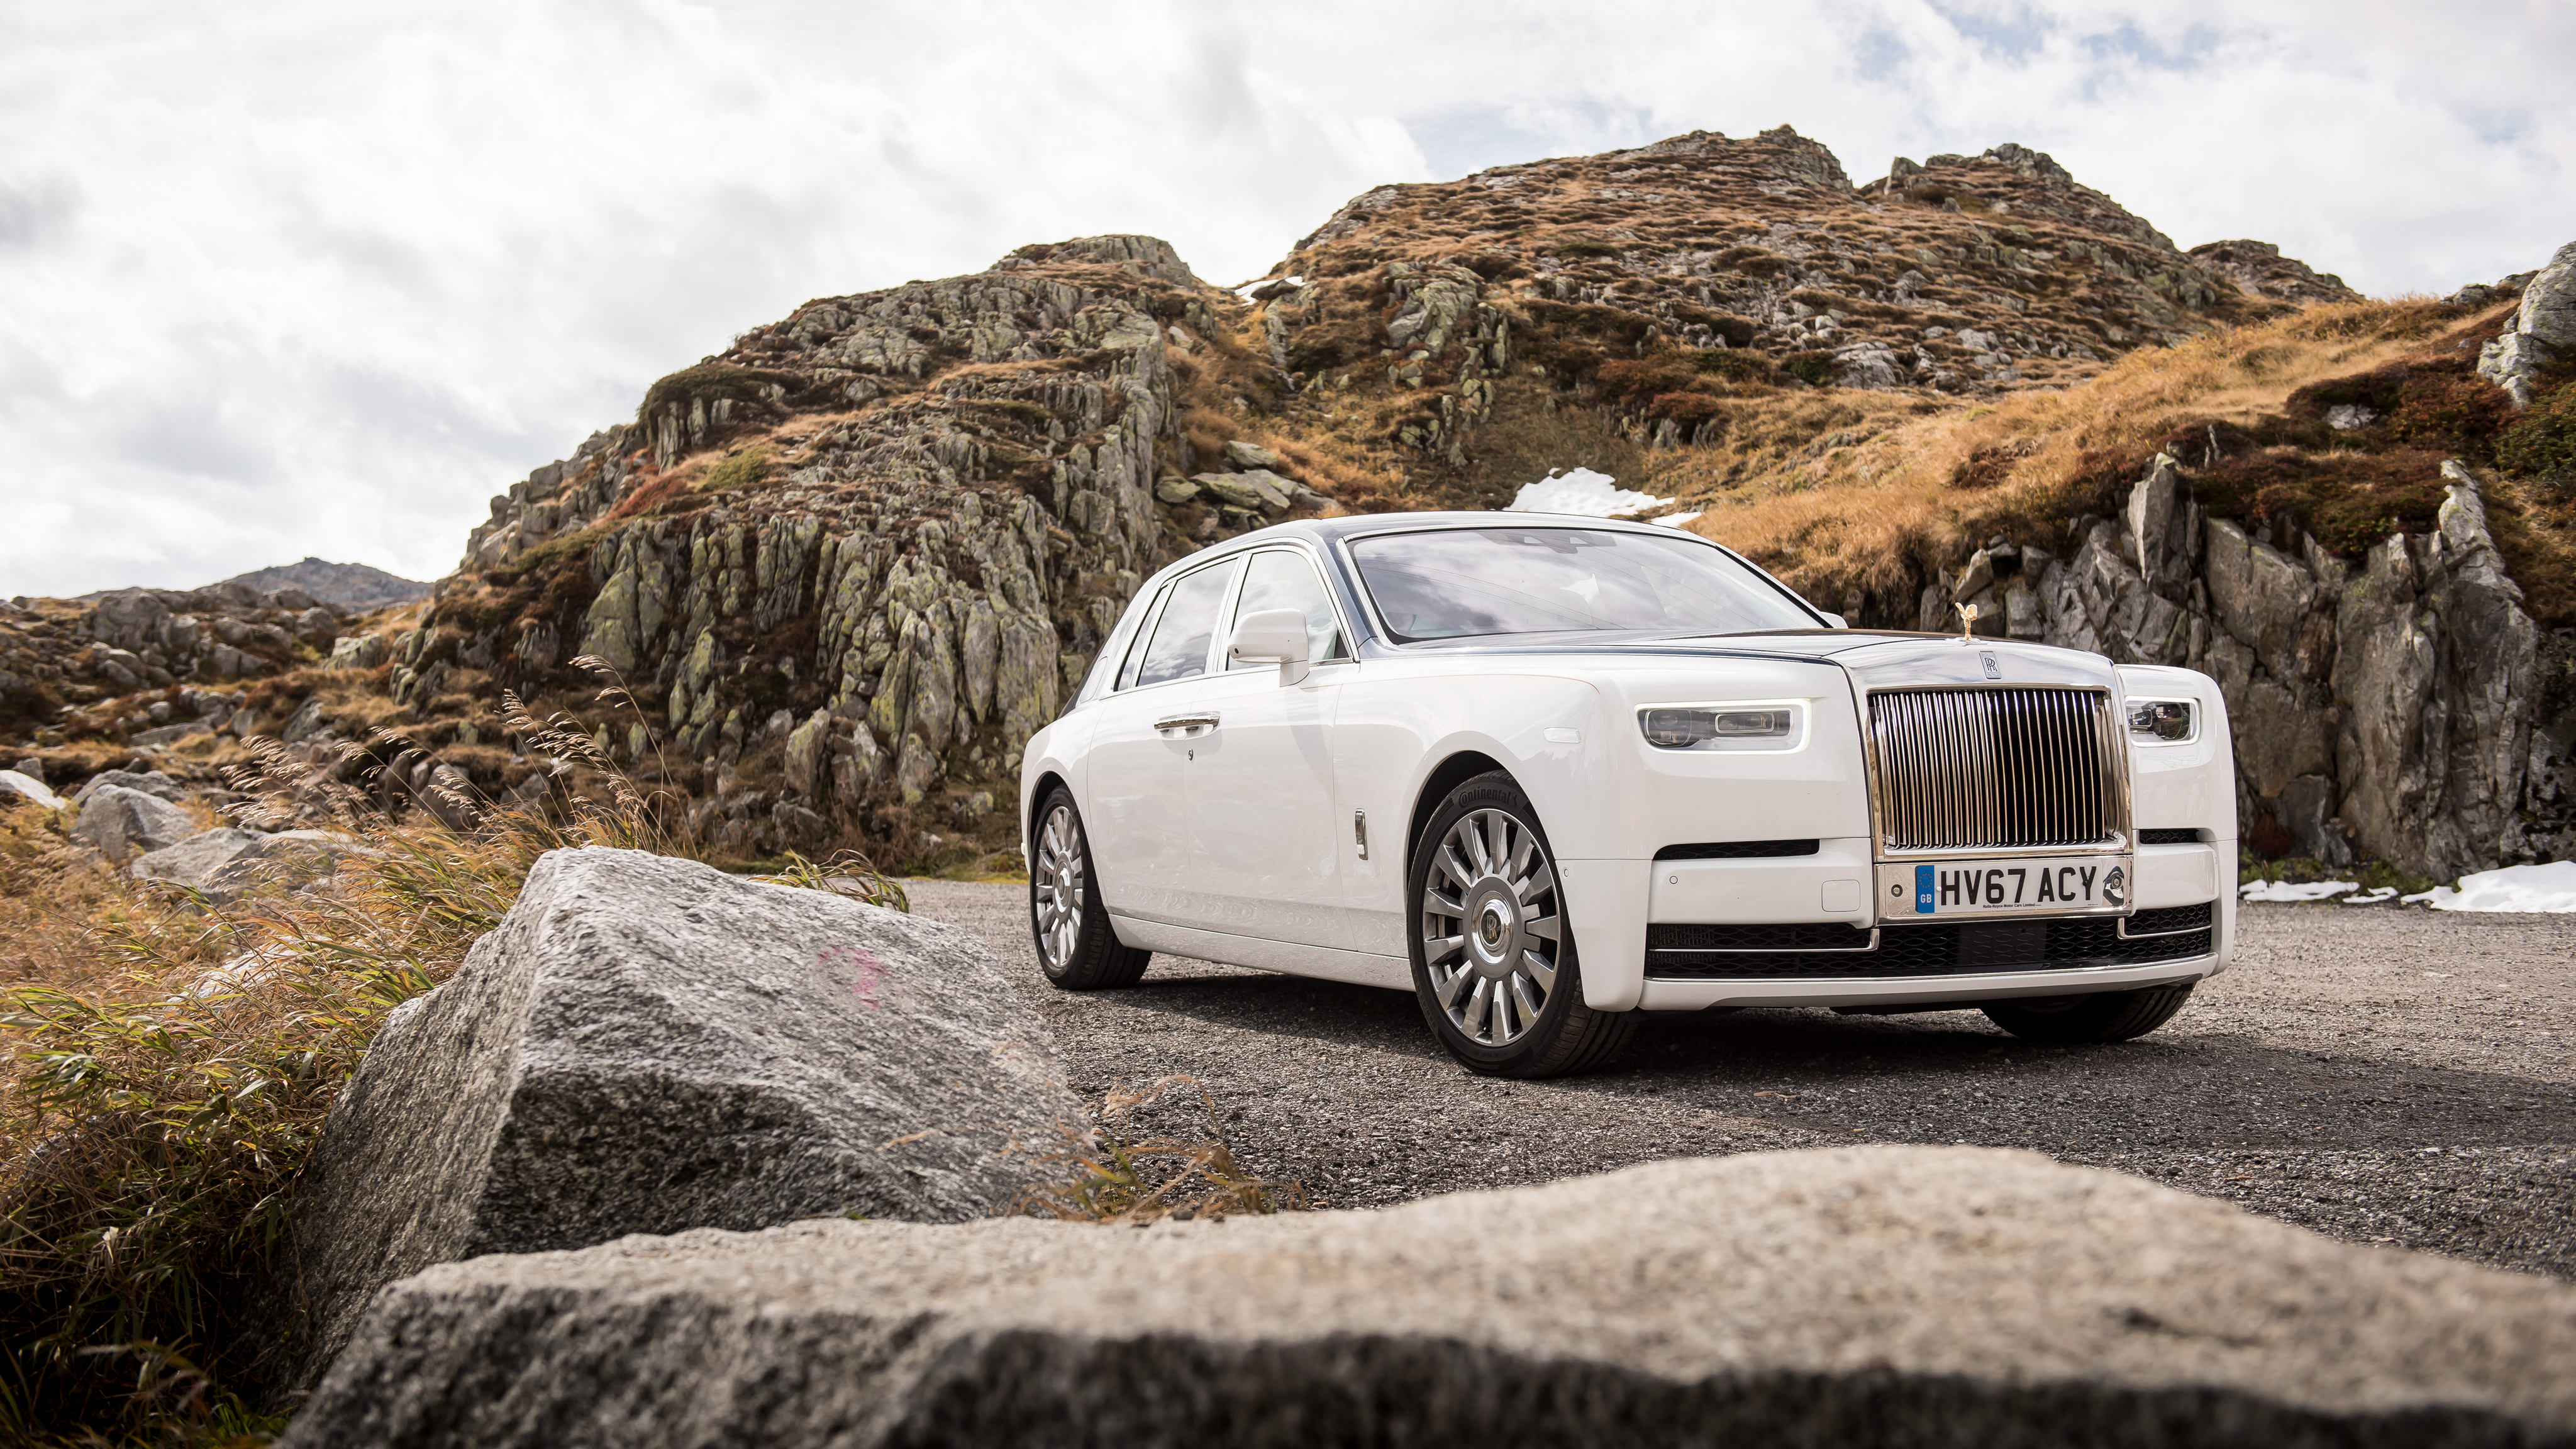 Rolls Royce Photos Download The BEST Free Rolls Royce Stock Photos  HD  Images